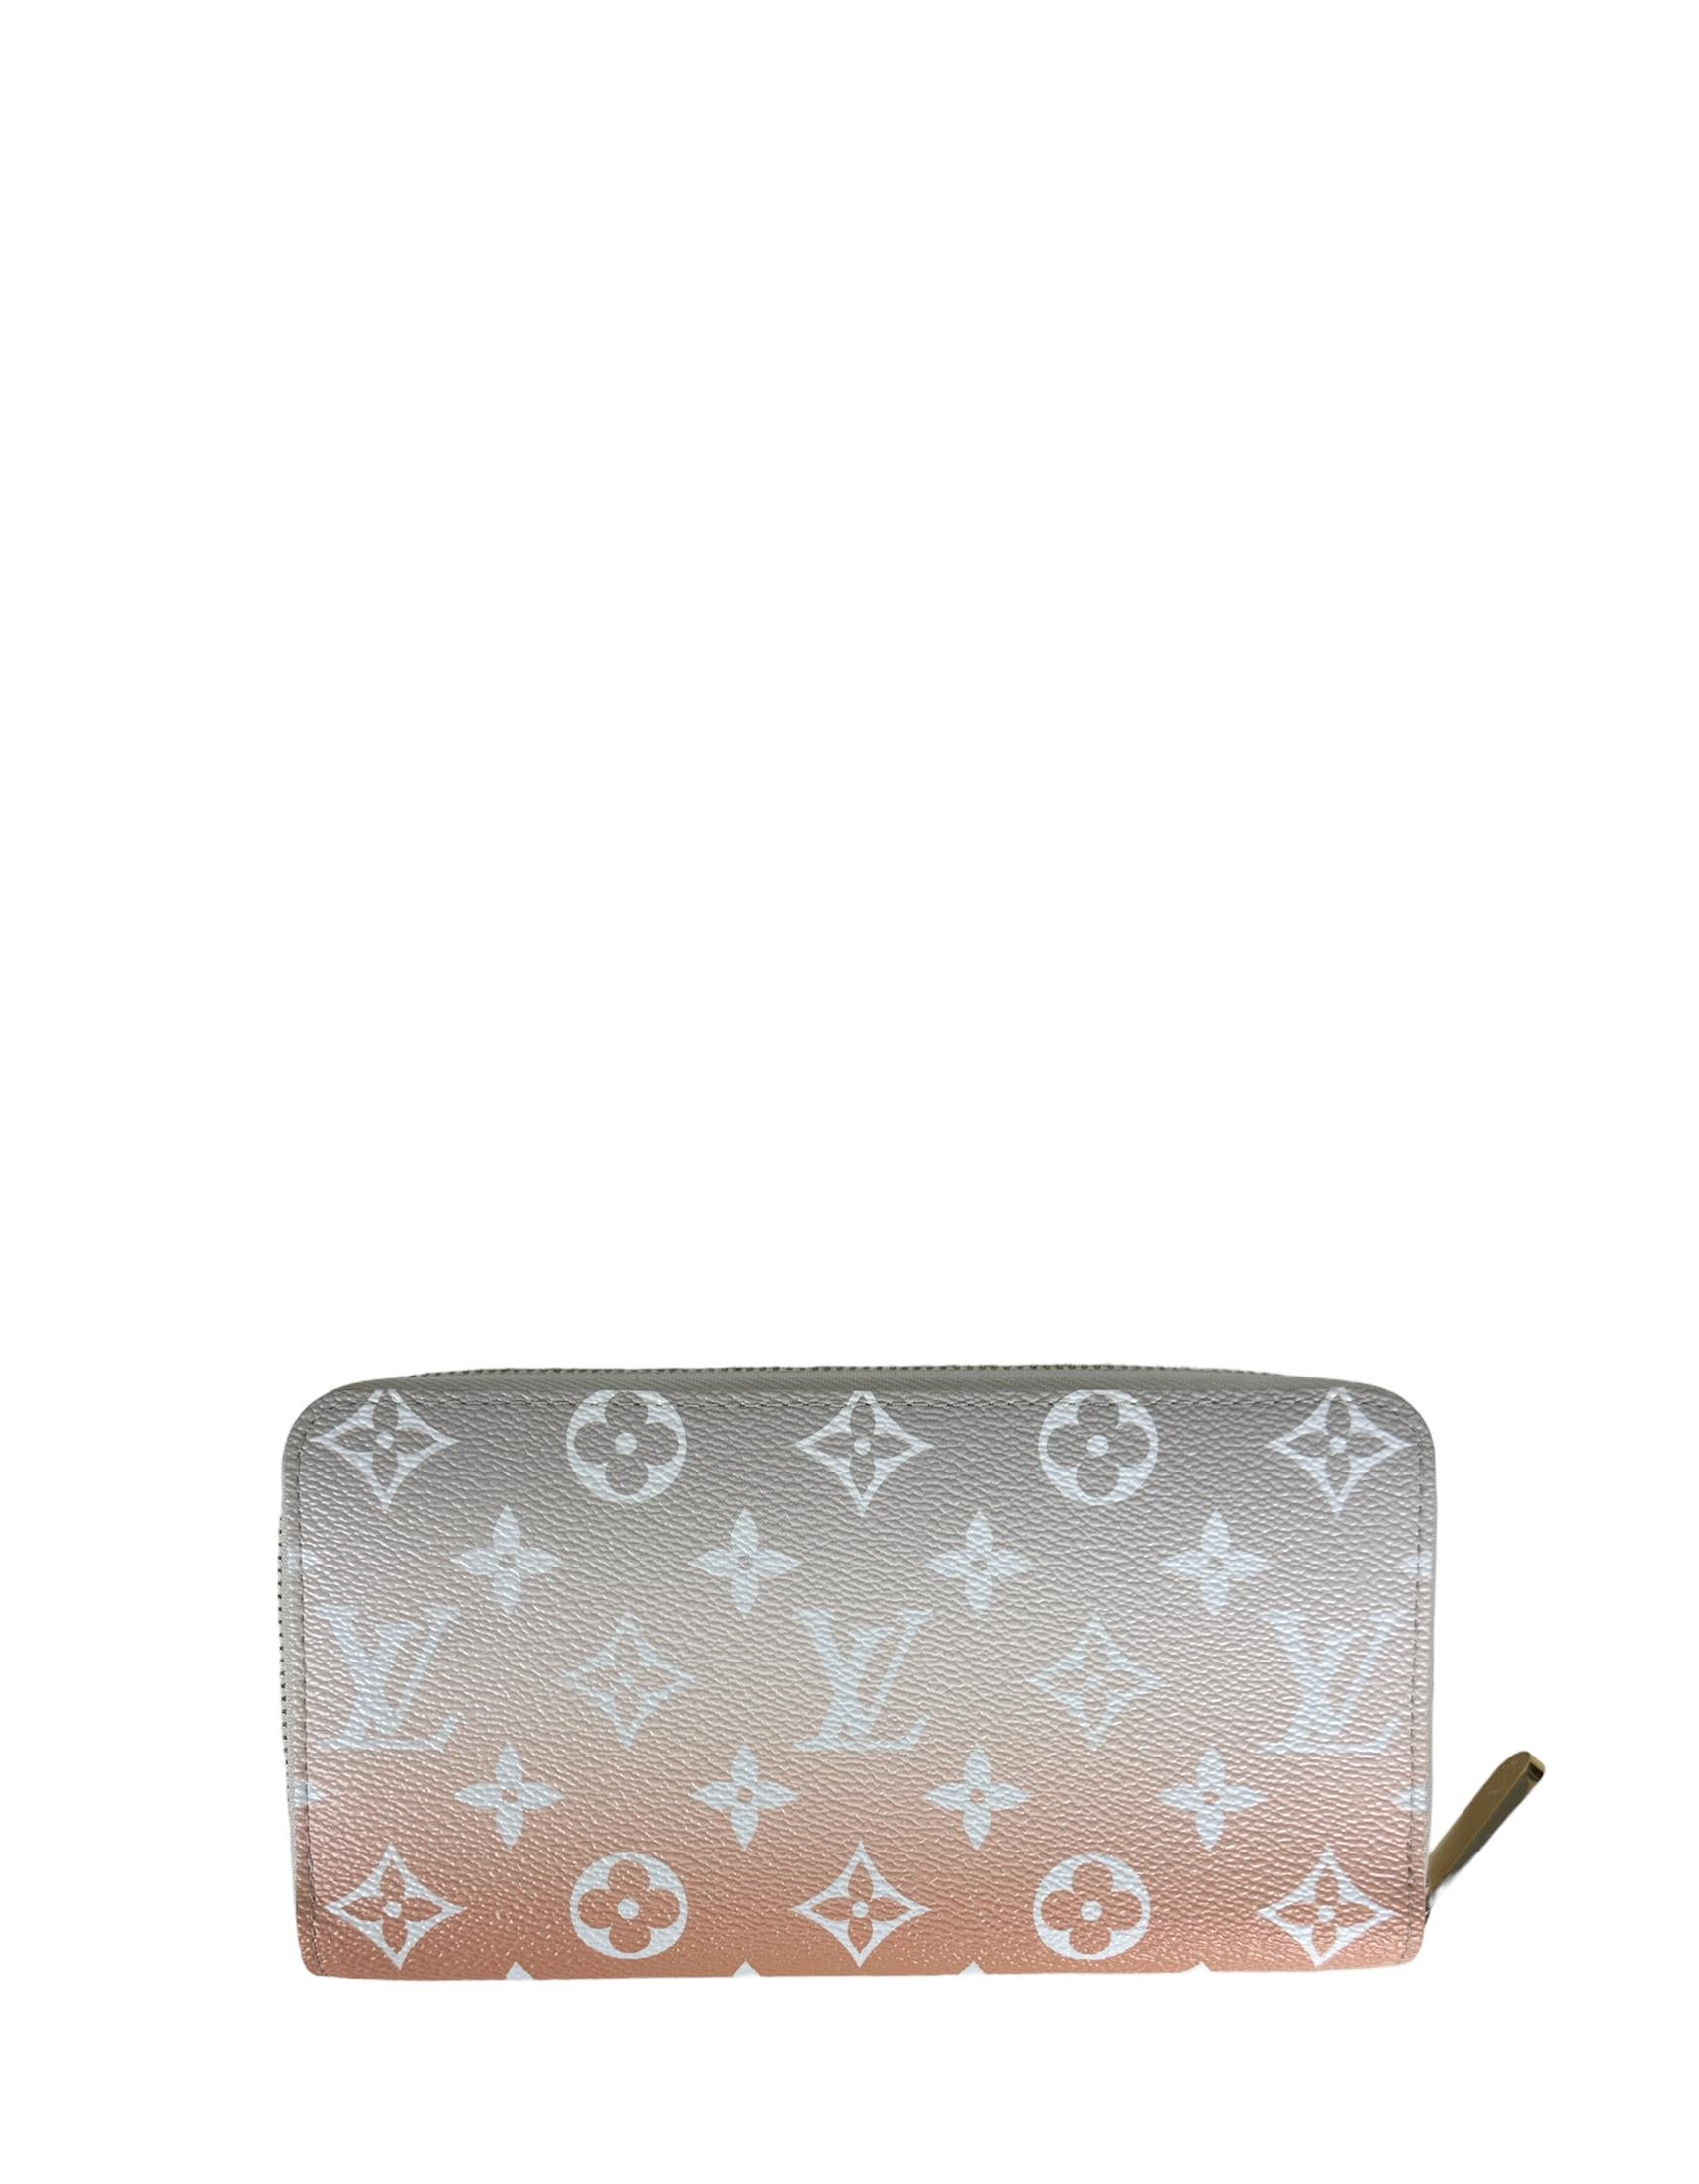 Louis Vuitton Brume Monogram Giant By The Pool Zippy Wallet

Made In: Spain
Year of Production: 2021
Color: Bume
Hardware: Goldtone
Materials: Coated canvas
Lining: Leather 
Closure/Opening: Zip around
Exterior Pockets: None
Interior Pockets: Eight